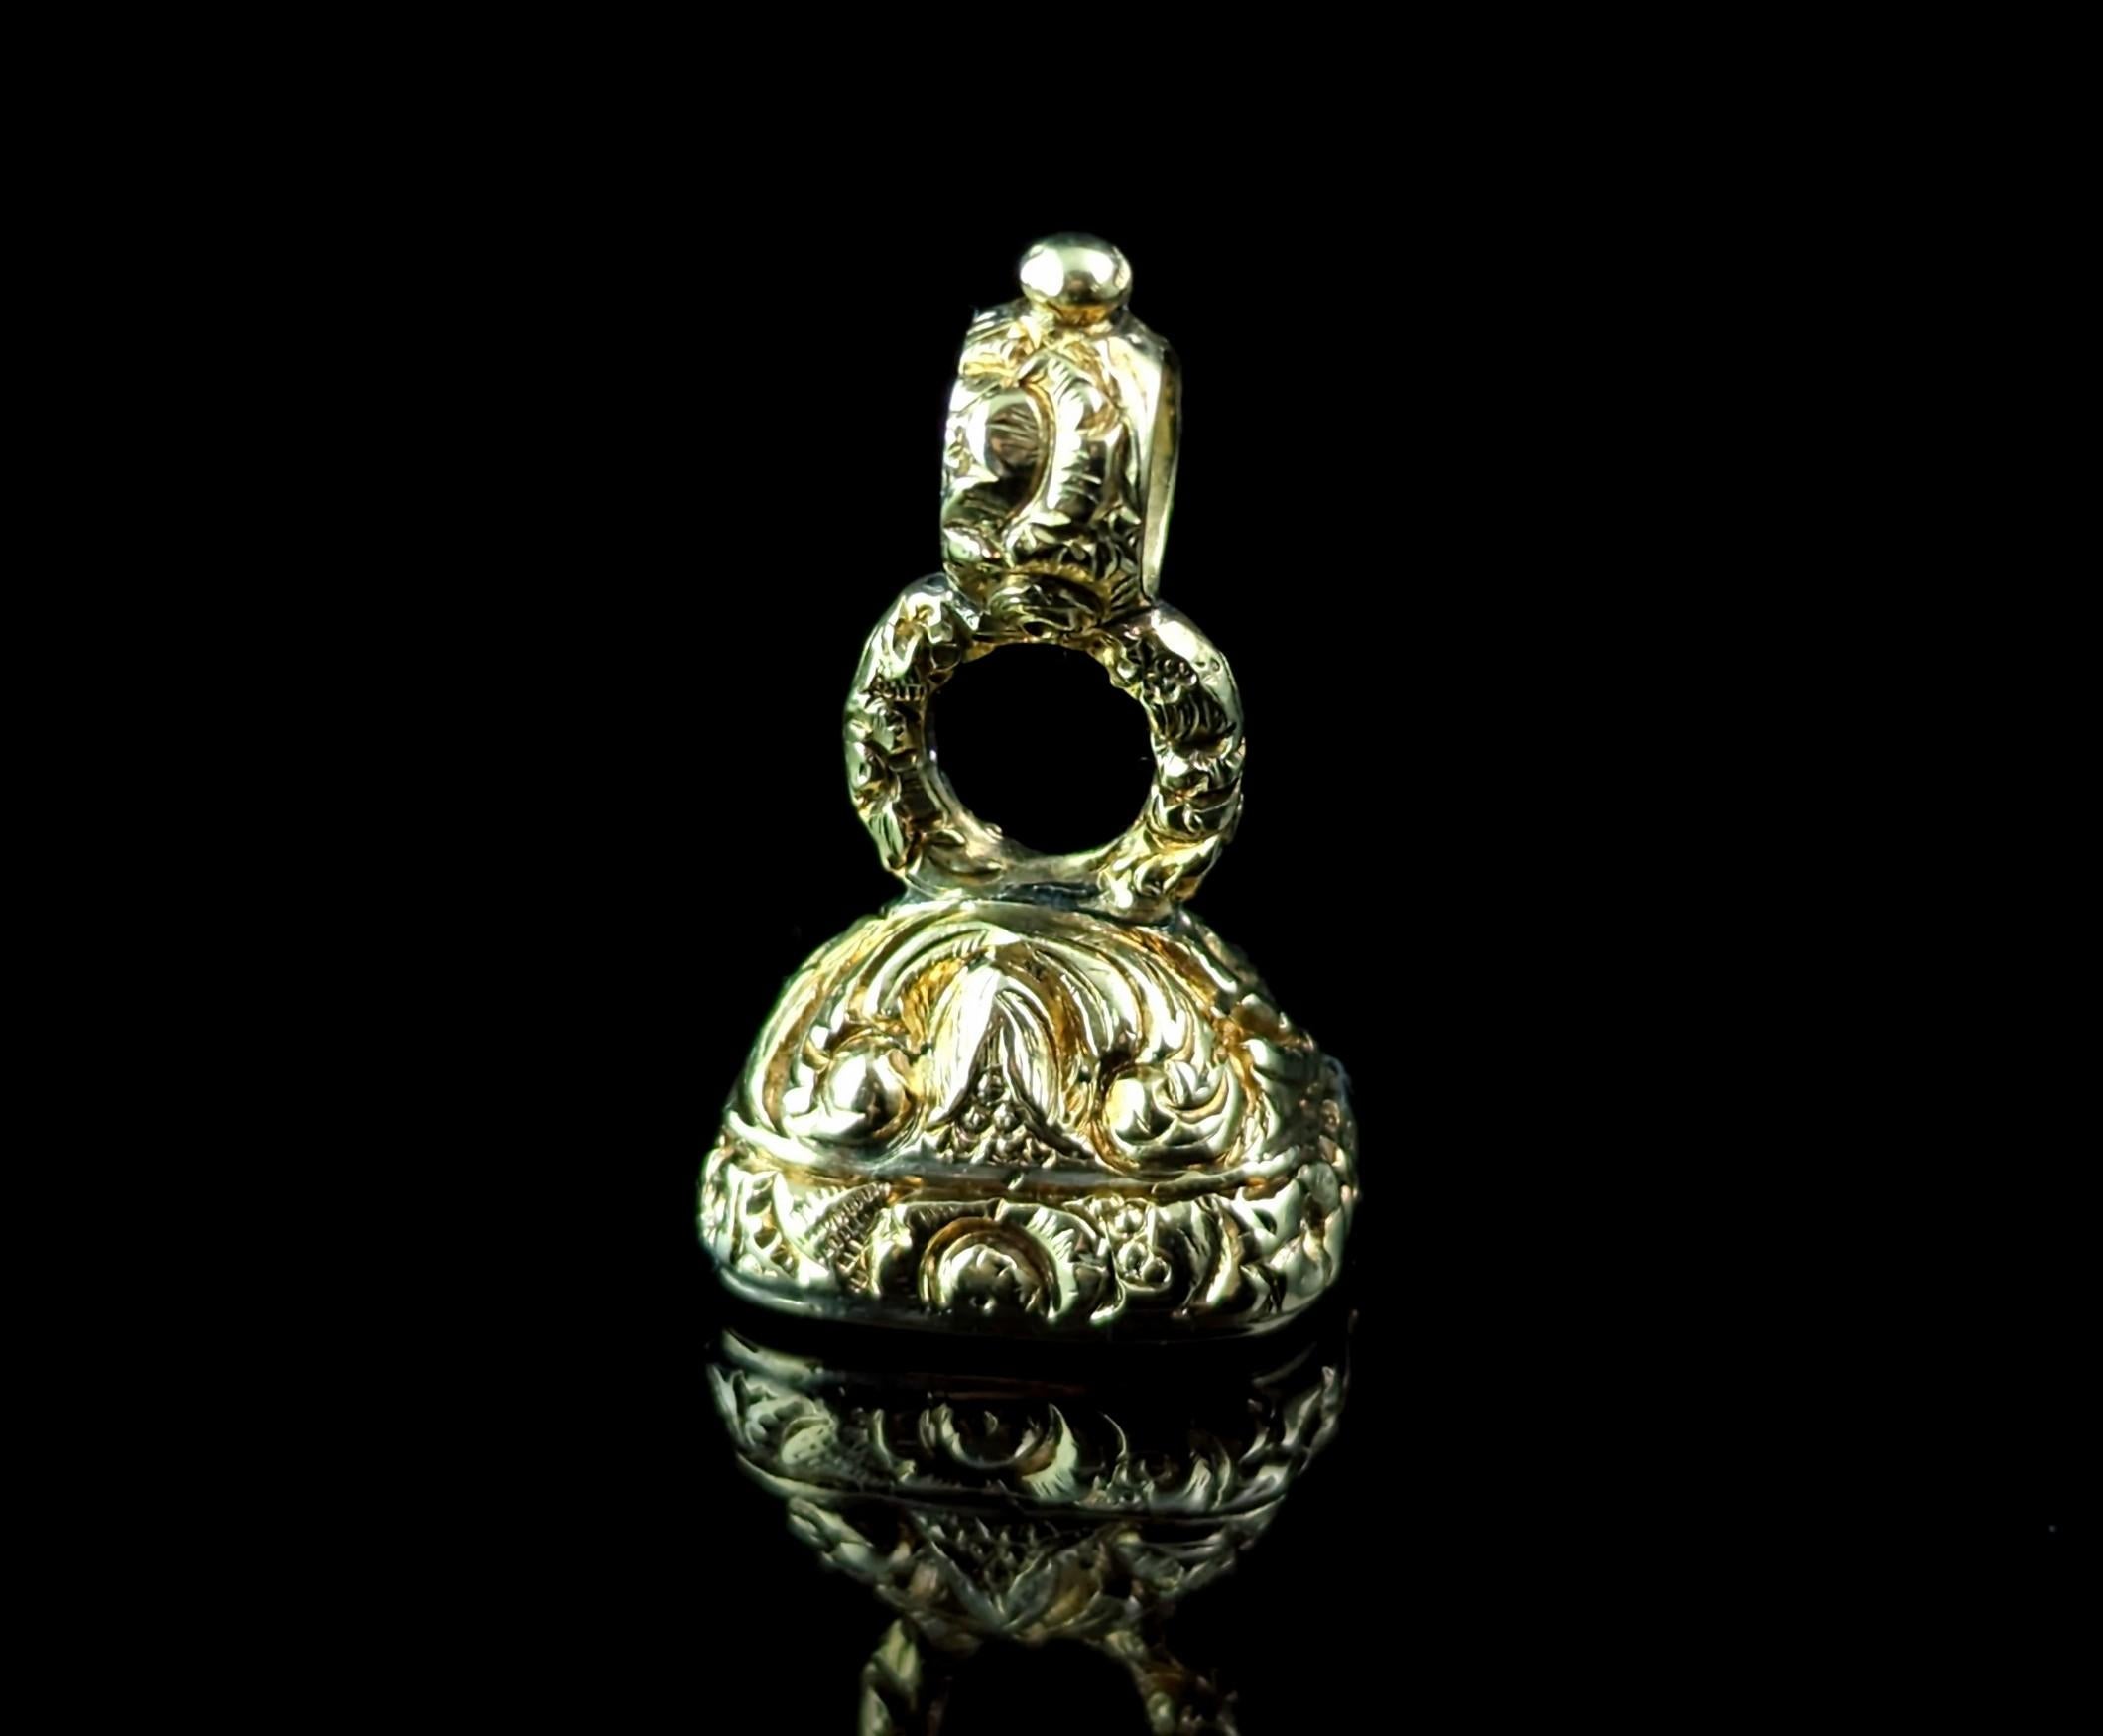 You can't go wrong with a beautiful antique seal fob, this sweet antique, Georgian era, gold cased seal fob is a real versatile beauty.

Made from rich 9ct yellow gold cased metal, it is has an elaborate engraved and chased design with floral